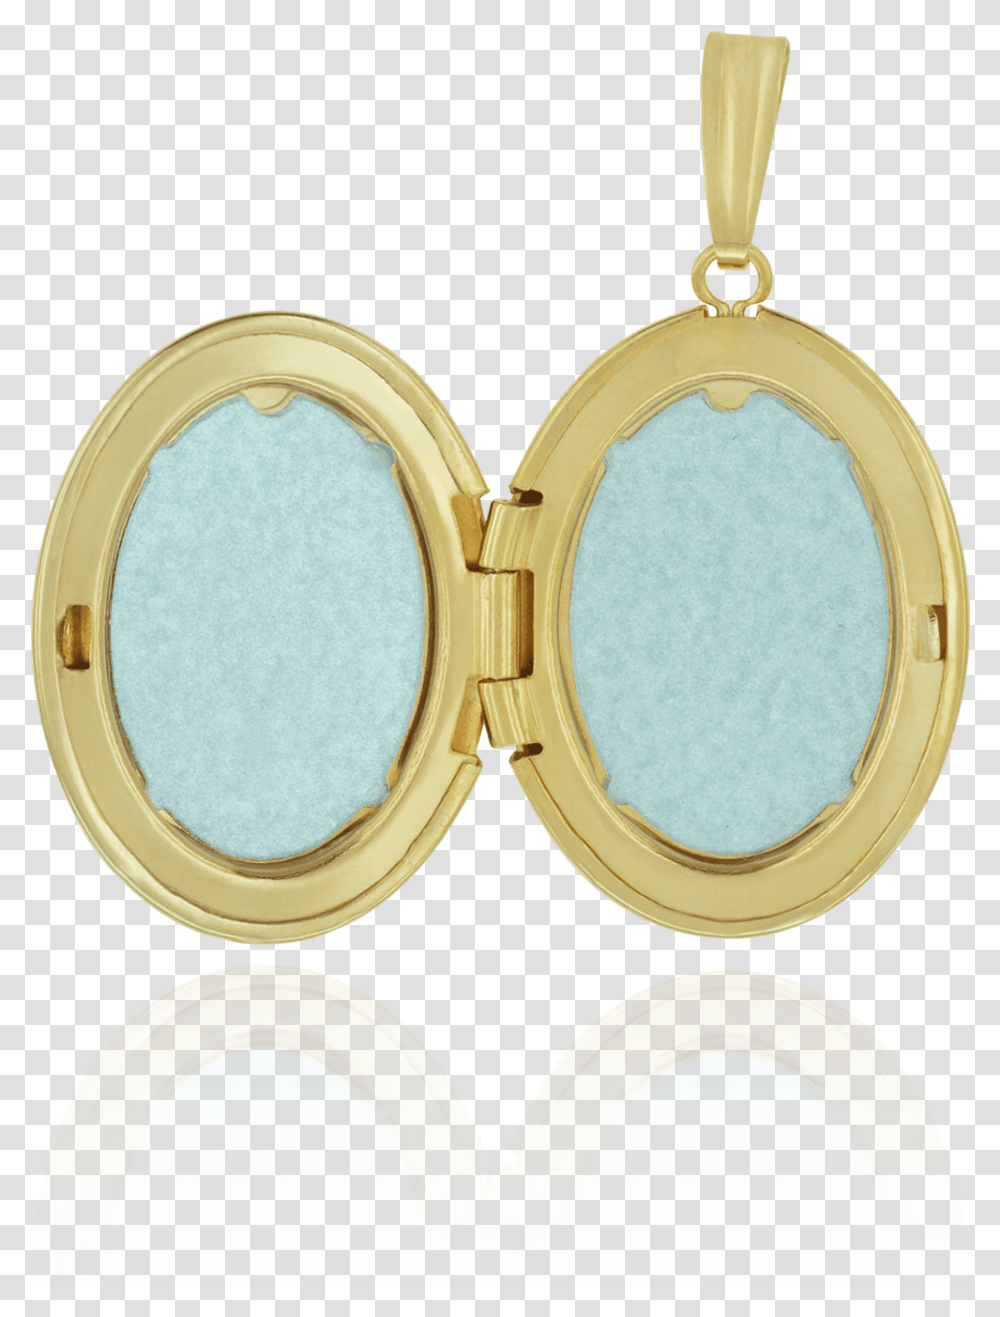 Engraved Flower Wreath Locket Locket, Pendant, Jewelry, Accessories, Accessory Transparent Png